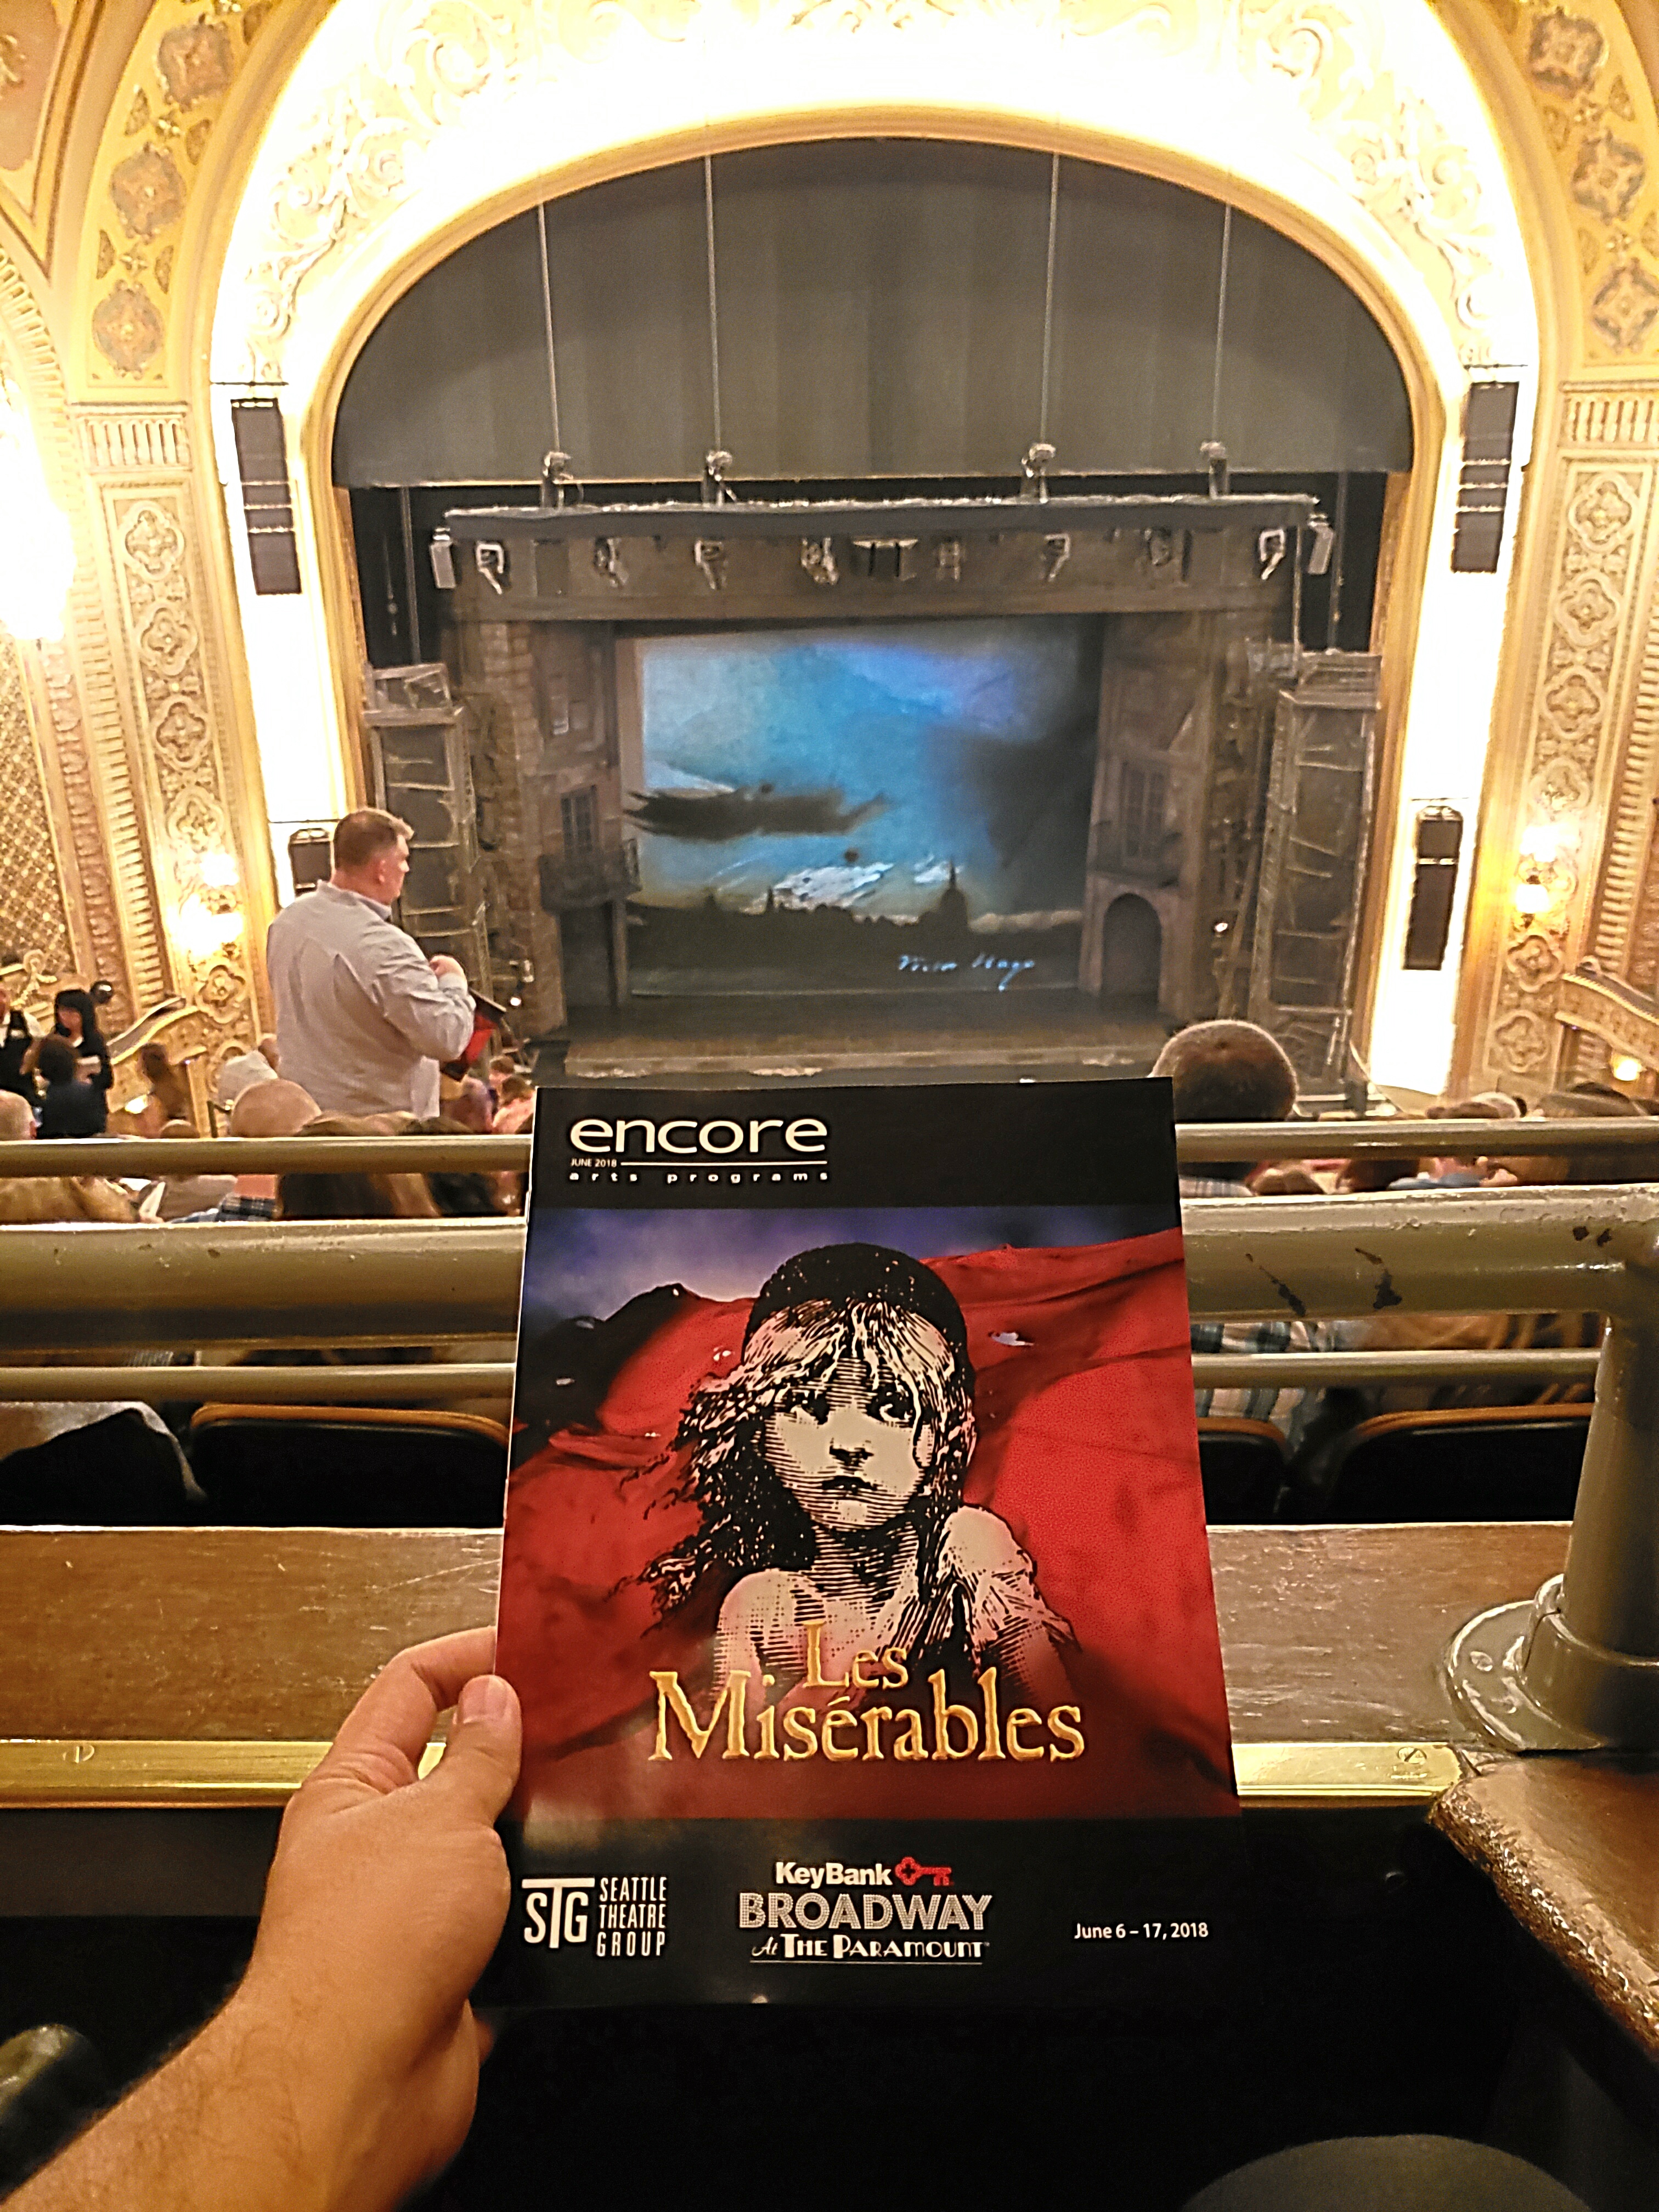 Attended the sold out tour of Les Miserables - Musical. Victor Hugo is such a debbie downer! Just realized I watched 2 musicals based on his books this weekend. Both had epic music scores. But would someone turn on more stage lighting?! Could barely see anything.